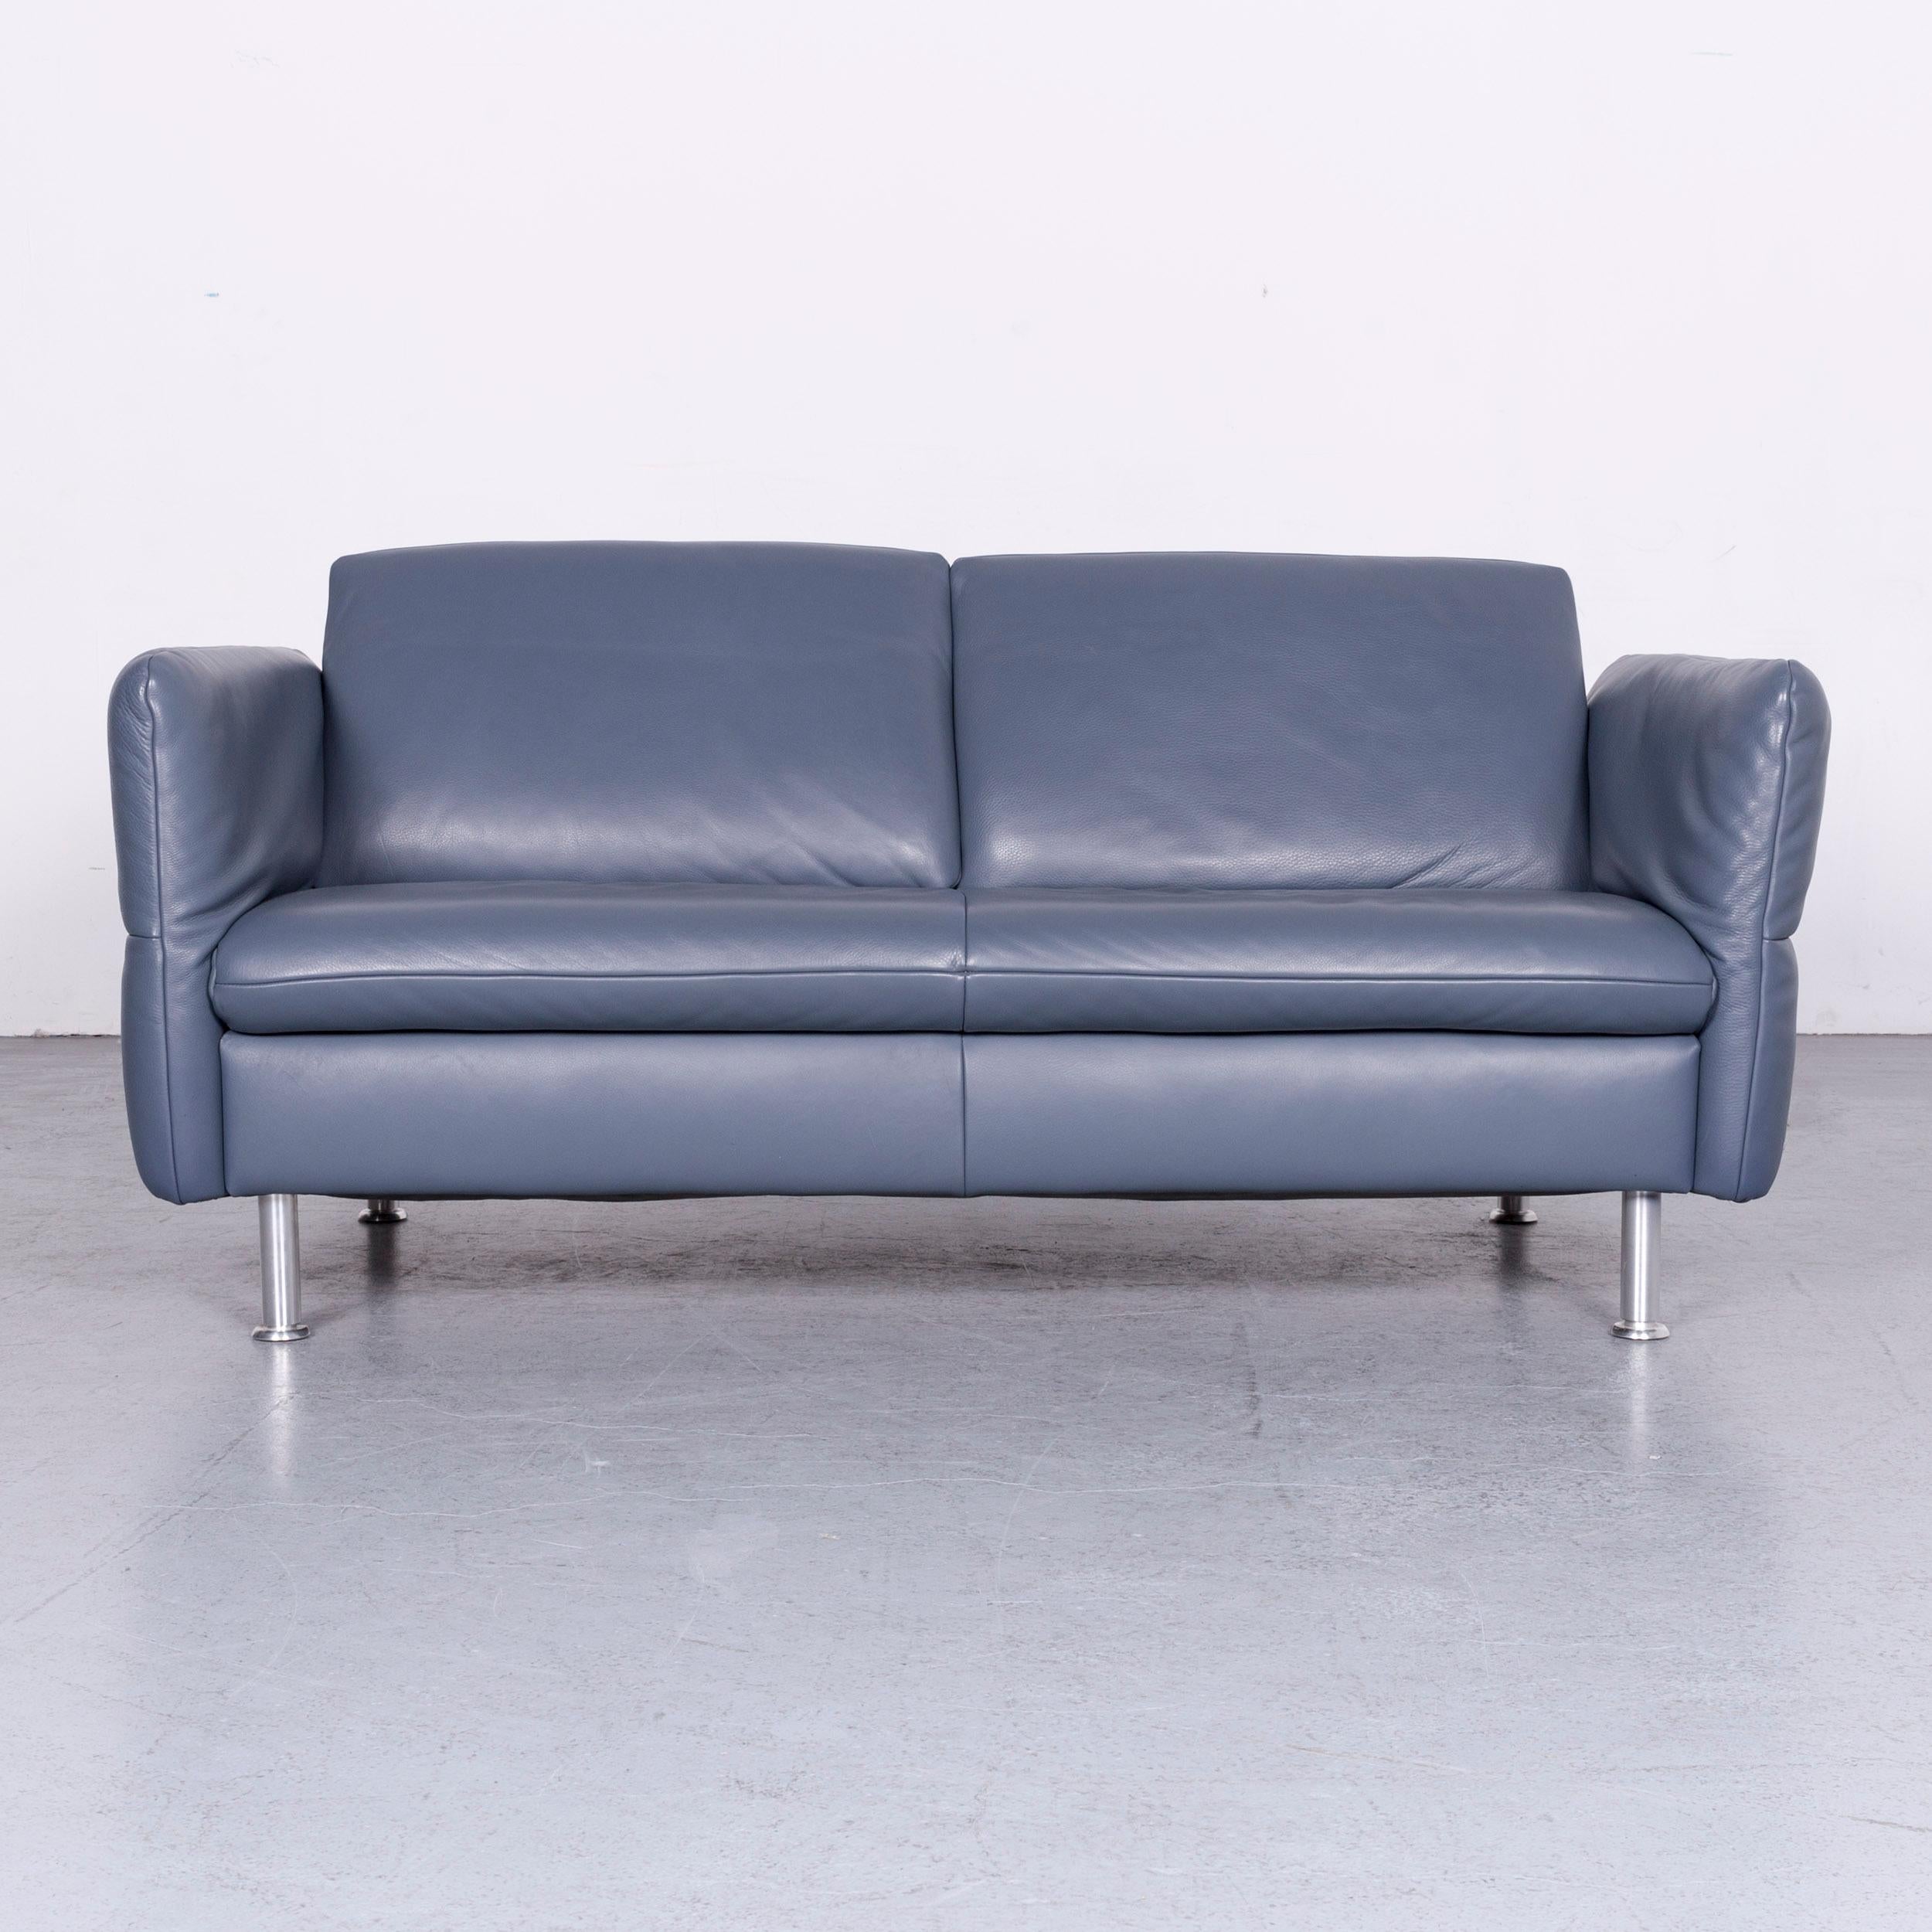 Contemporary Koinor Designer Two-Seat Sofa Armchair Footstool Set Blue Leather